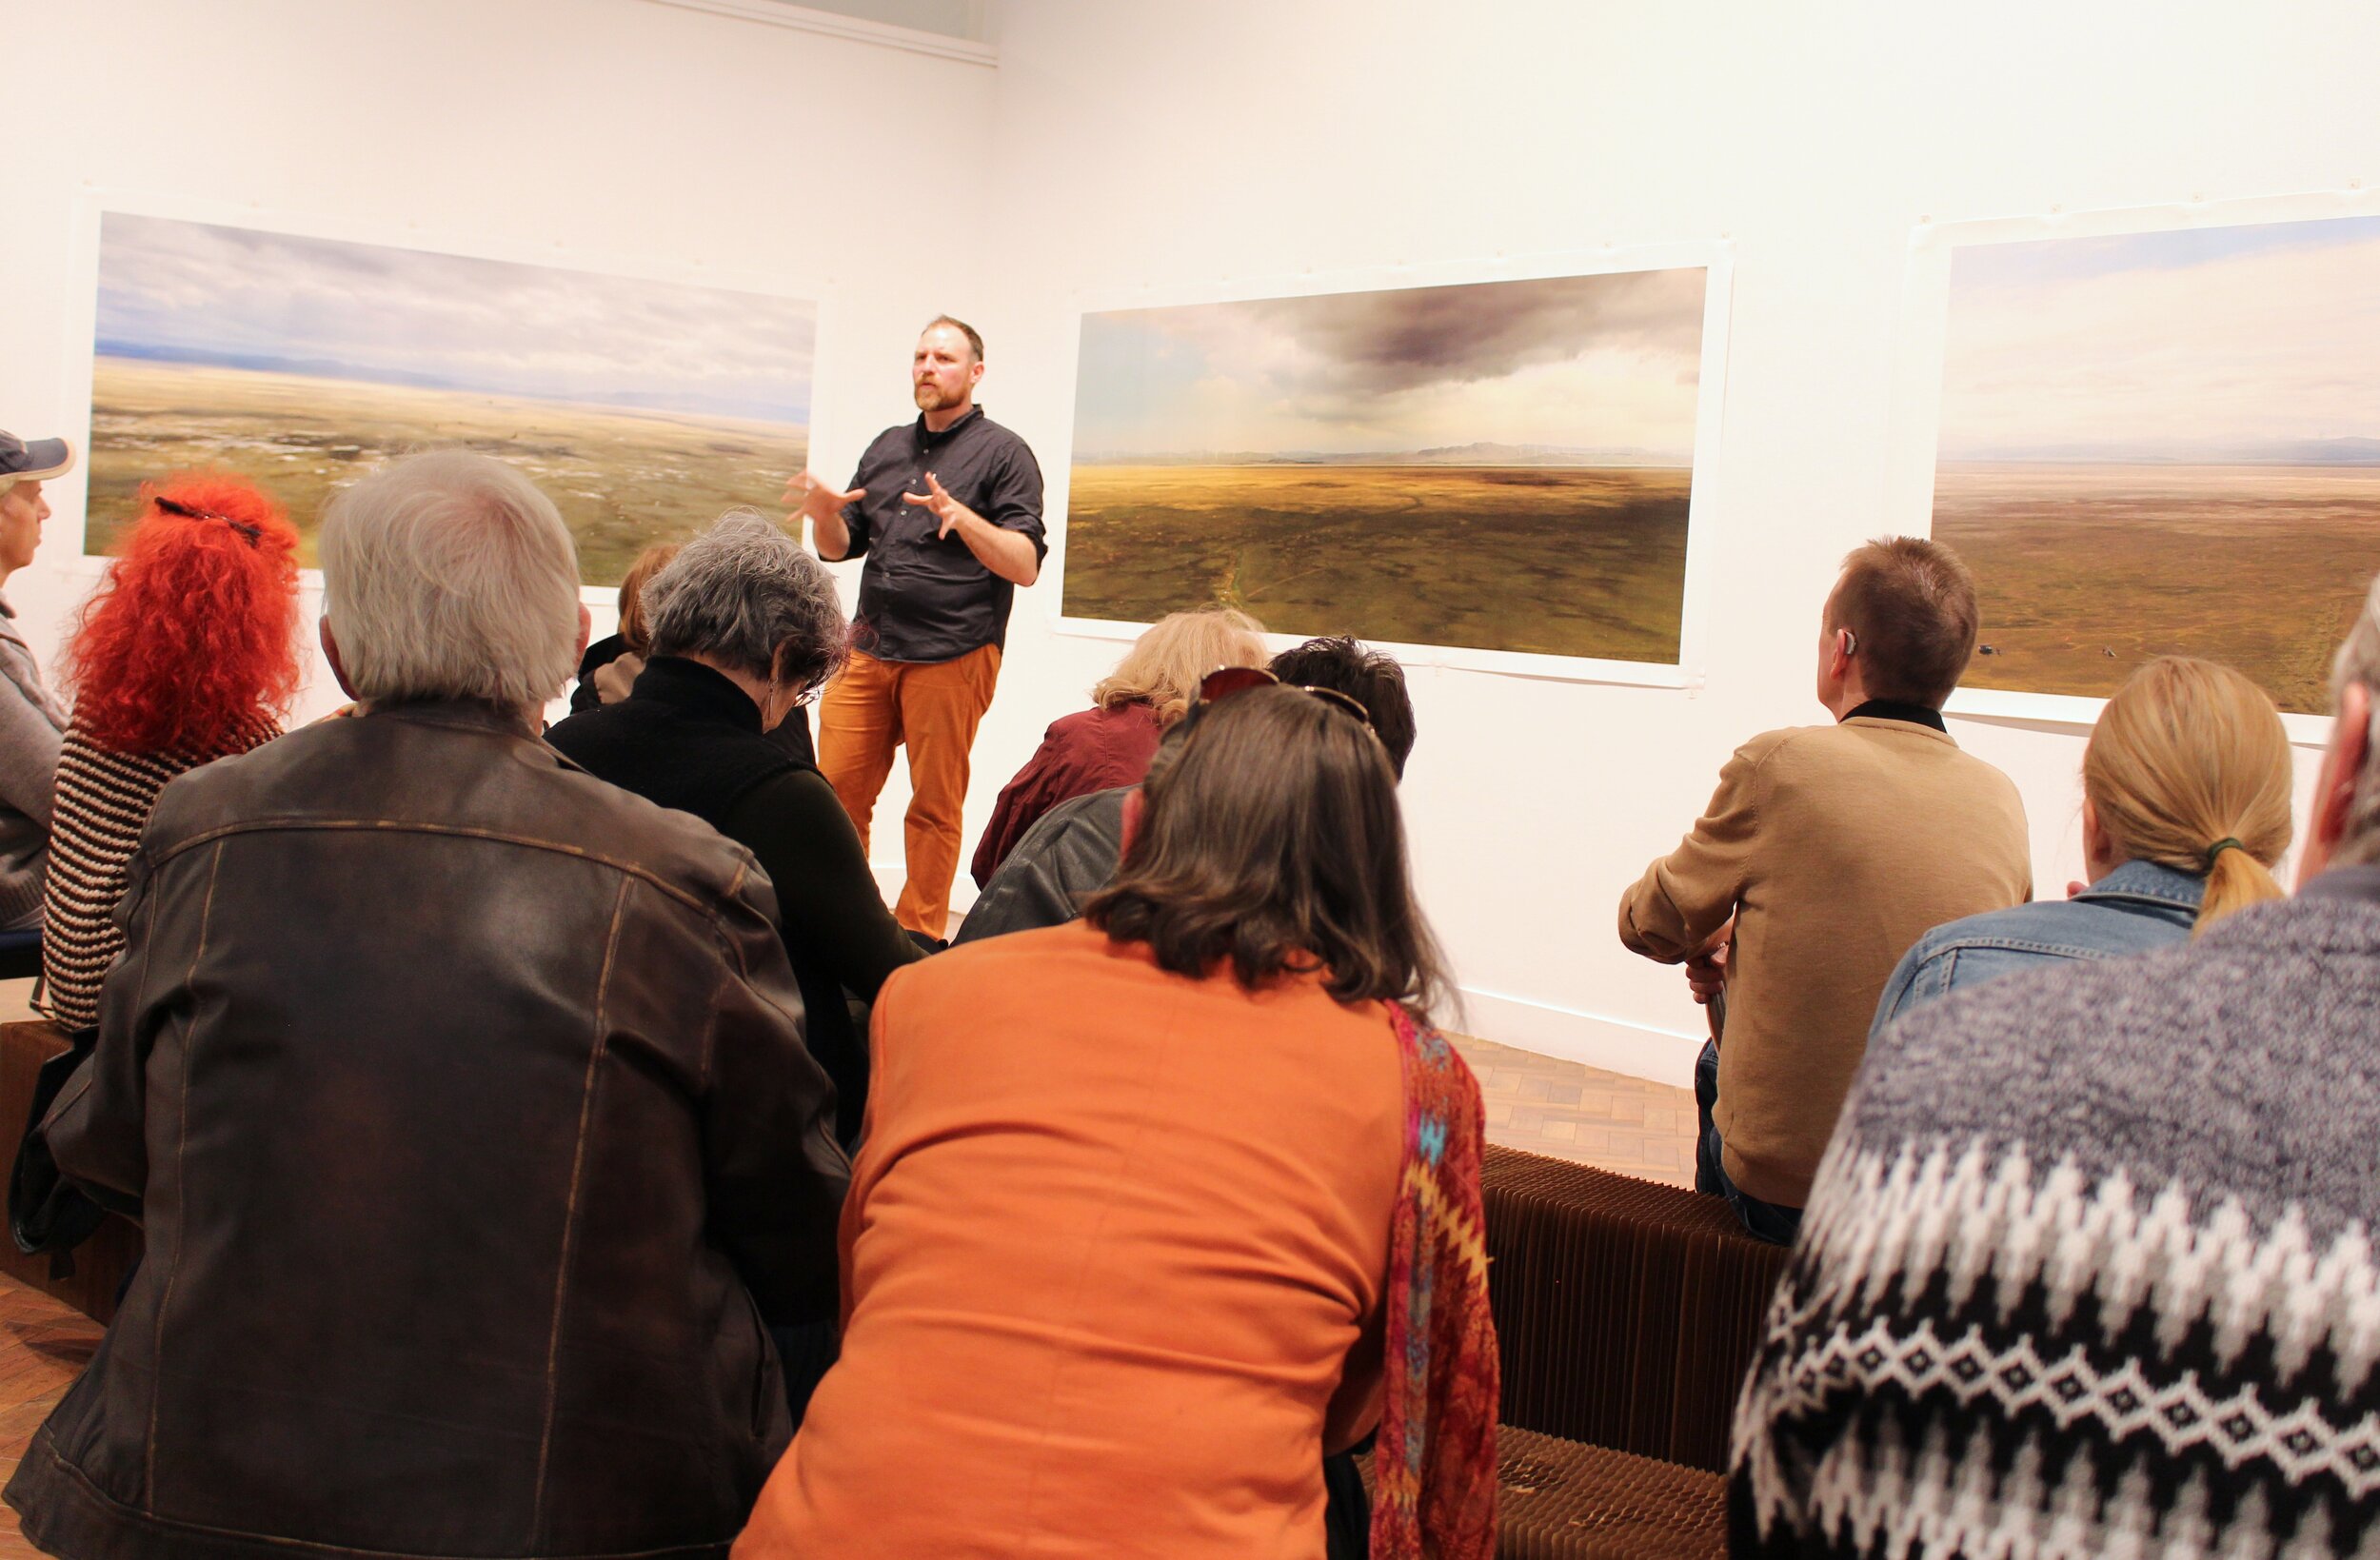  Floor talk by artist  Rowan Conroy  at his solo exhibition  Sighteeing,  held at  Goulburn Regional Art Gallery , 2019.  The works visible in the photo are by the artist. Photo: Courtesy Goulburn Regional Art Gallery. 